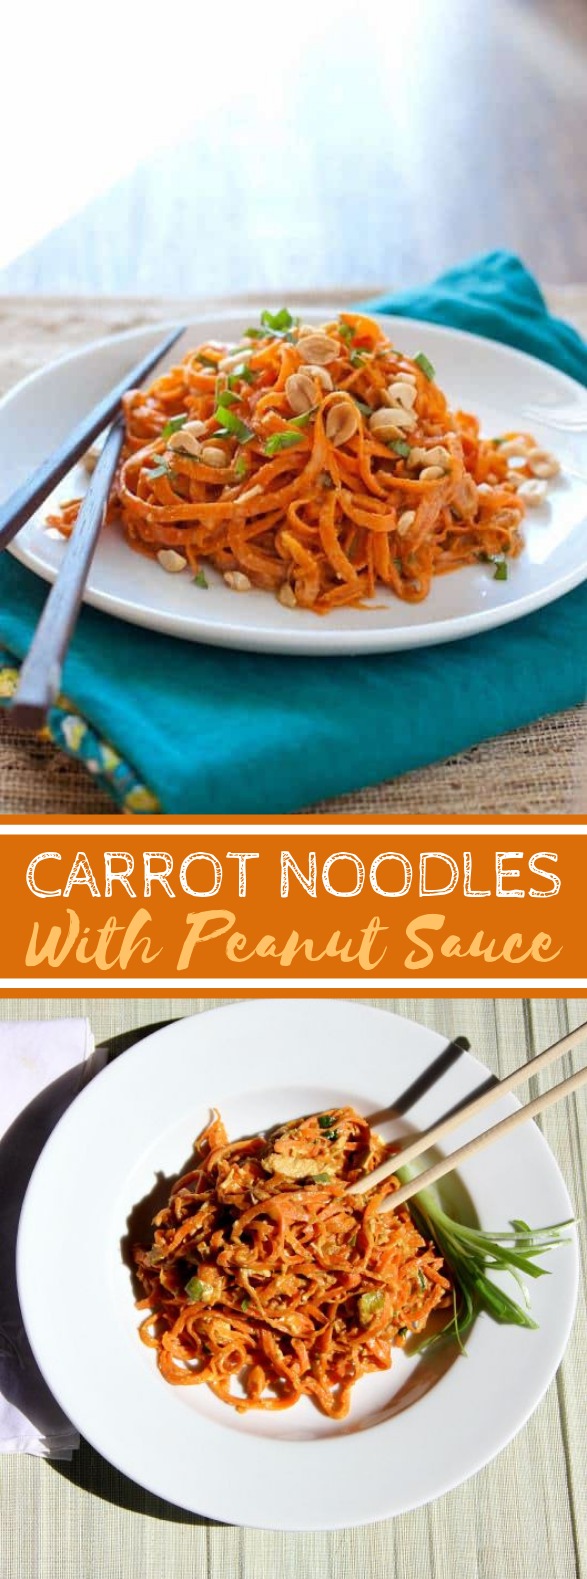 Carrot Noodles with Peanut Sauce #healthy #lowcarb